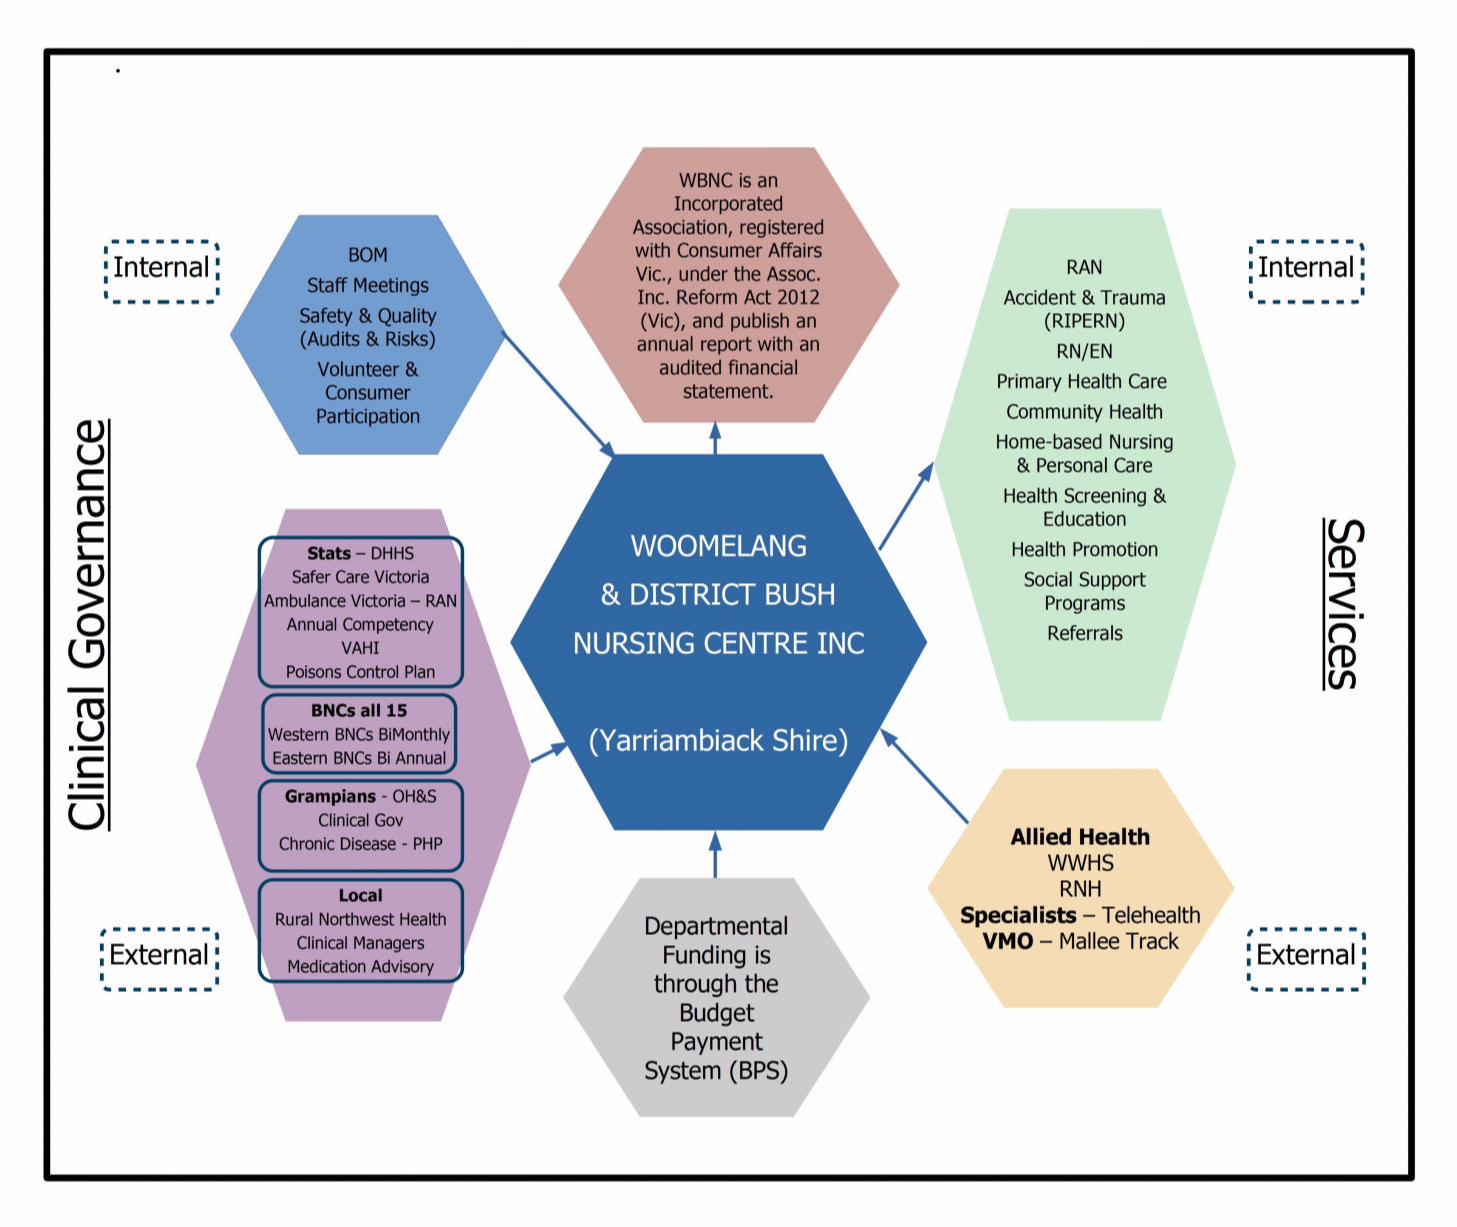 An image mapping the governance relationships of the WDBNC